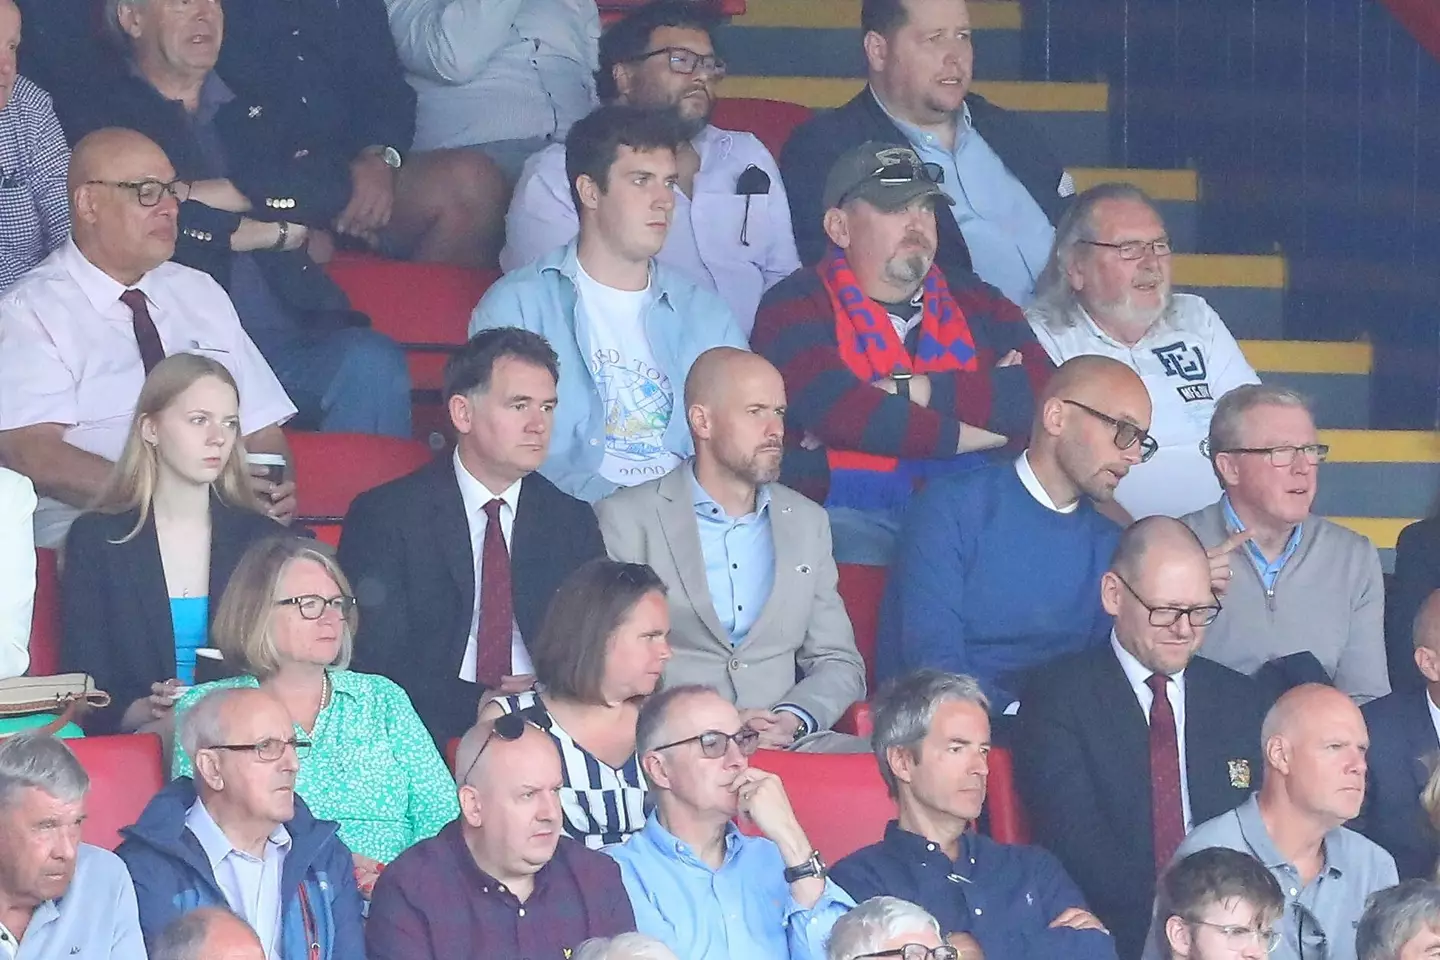 Ten Hag watched United's final game of the season from the stands. Image: Alamy